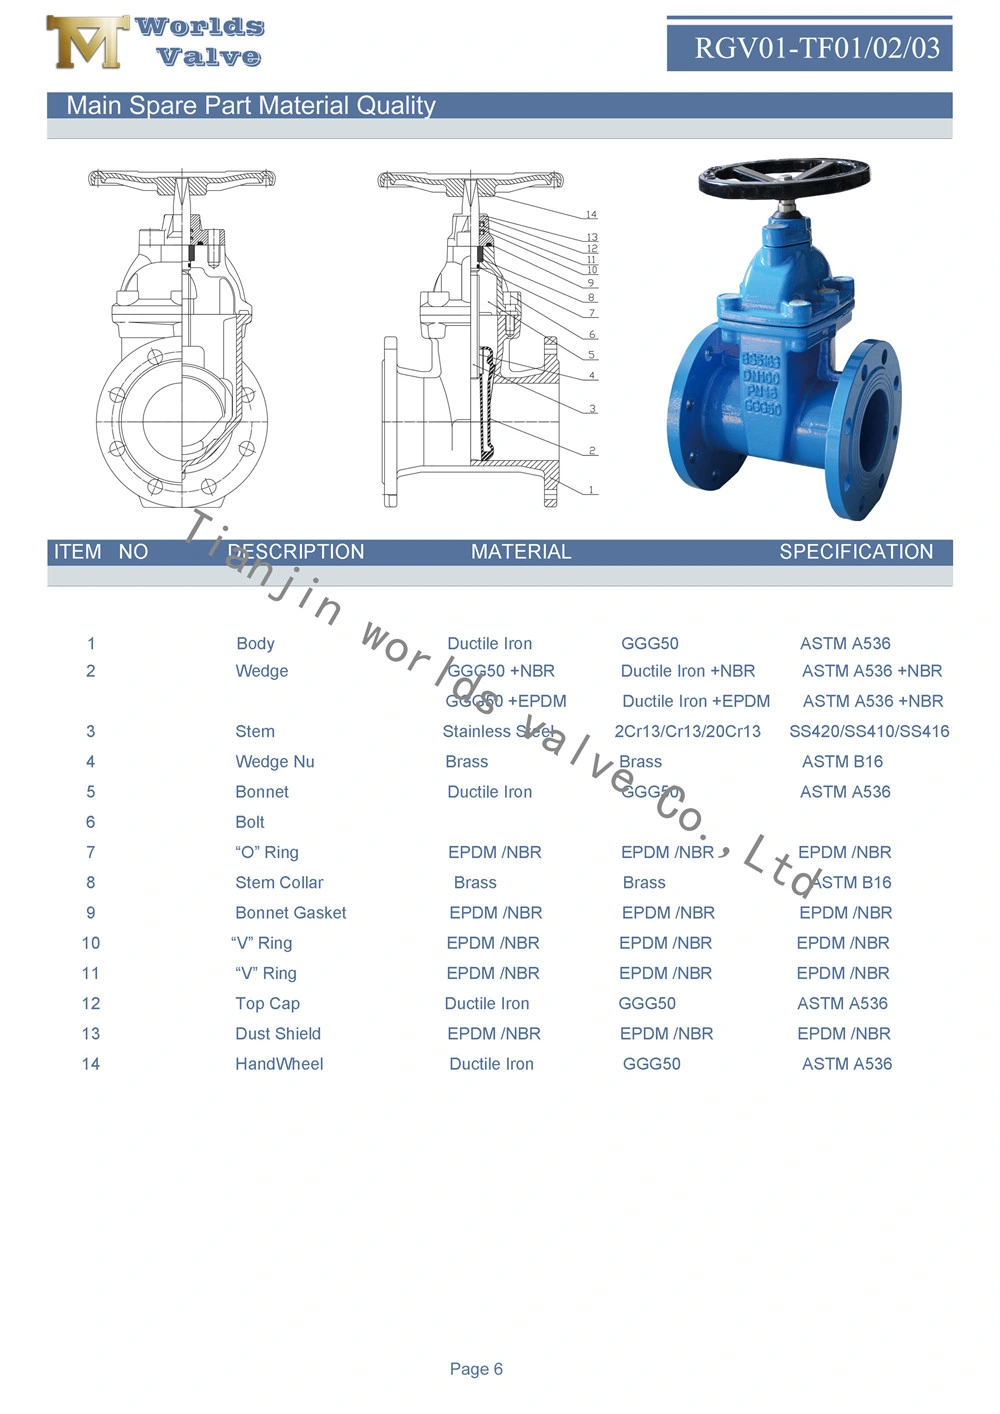 Rubber Lined Cast Iron Gate Valves with Flange End BS5163 Pn10 Pn16 with Cap